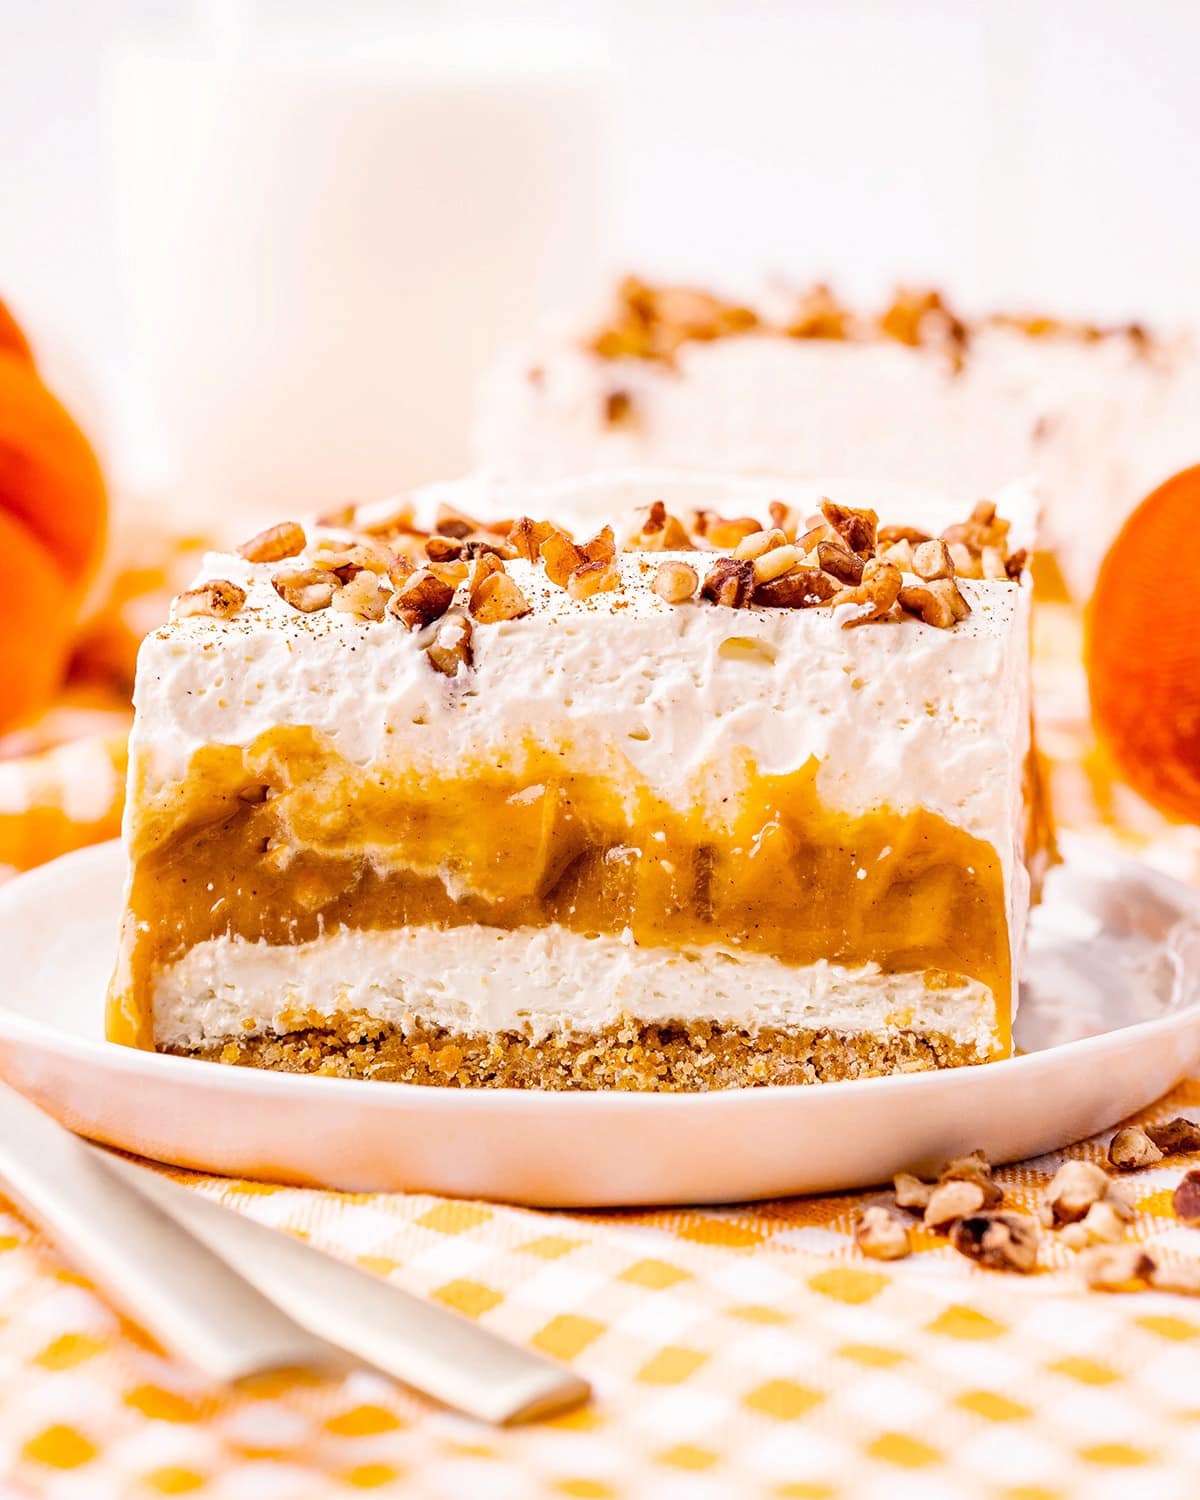 A piece of a layered dessert with graham cracker crust, no bake cheesecake, pumpkin pudding, and whipped cream.